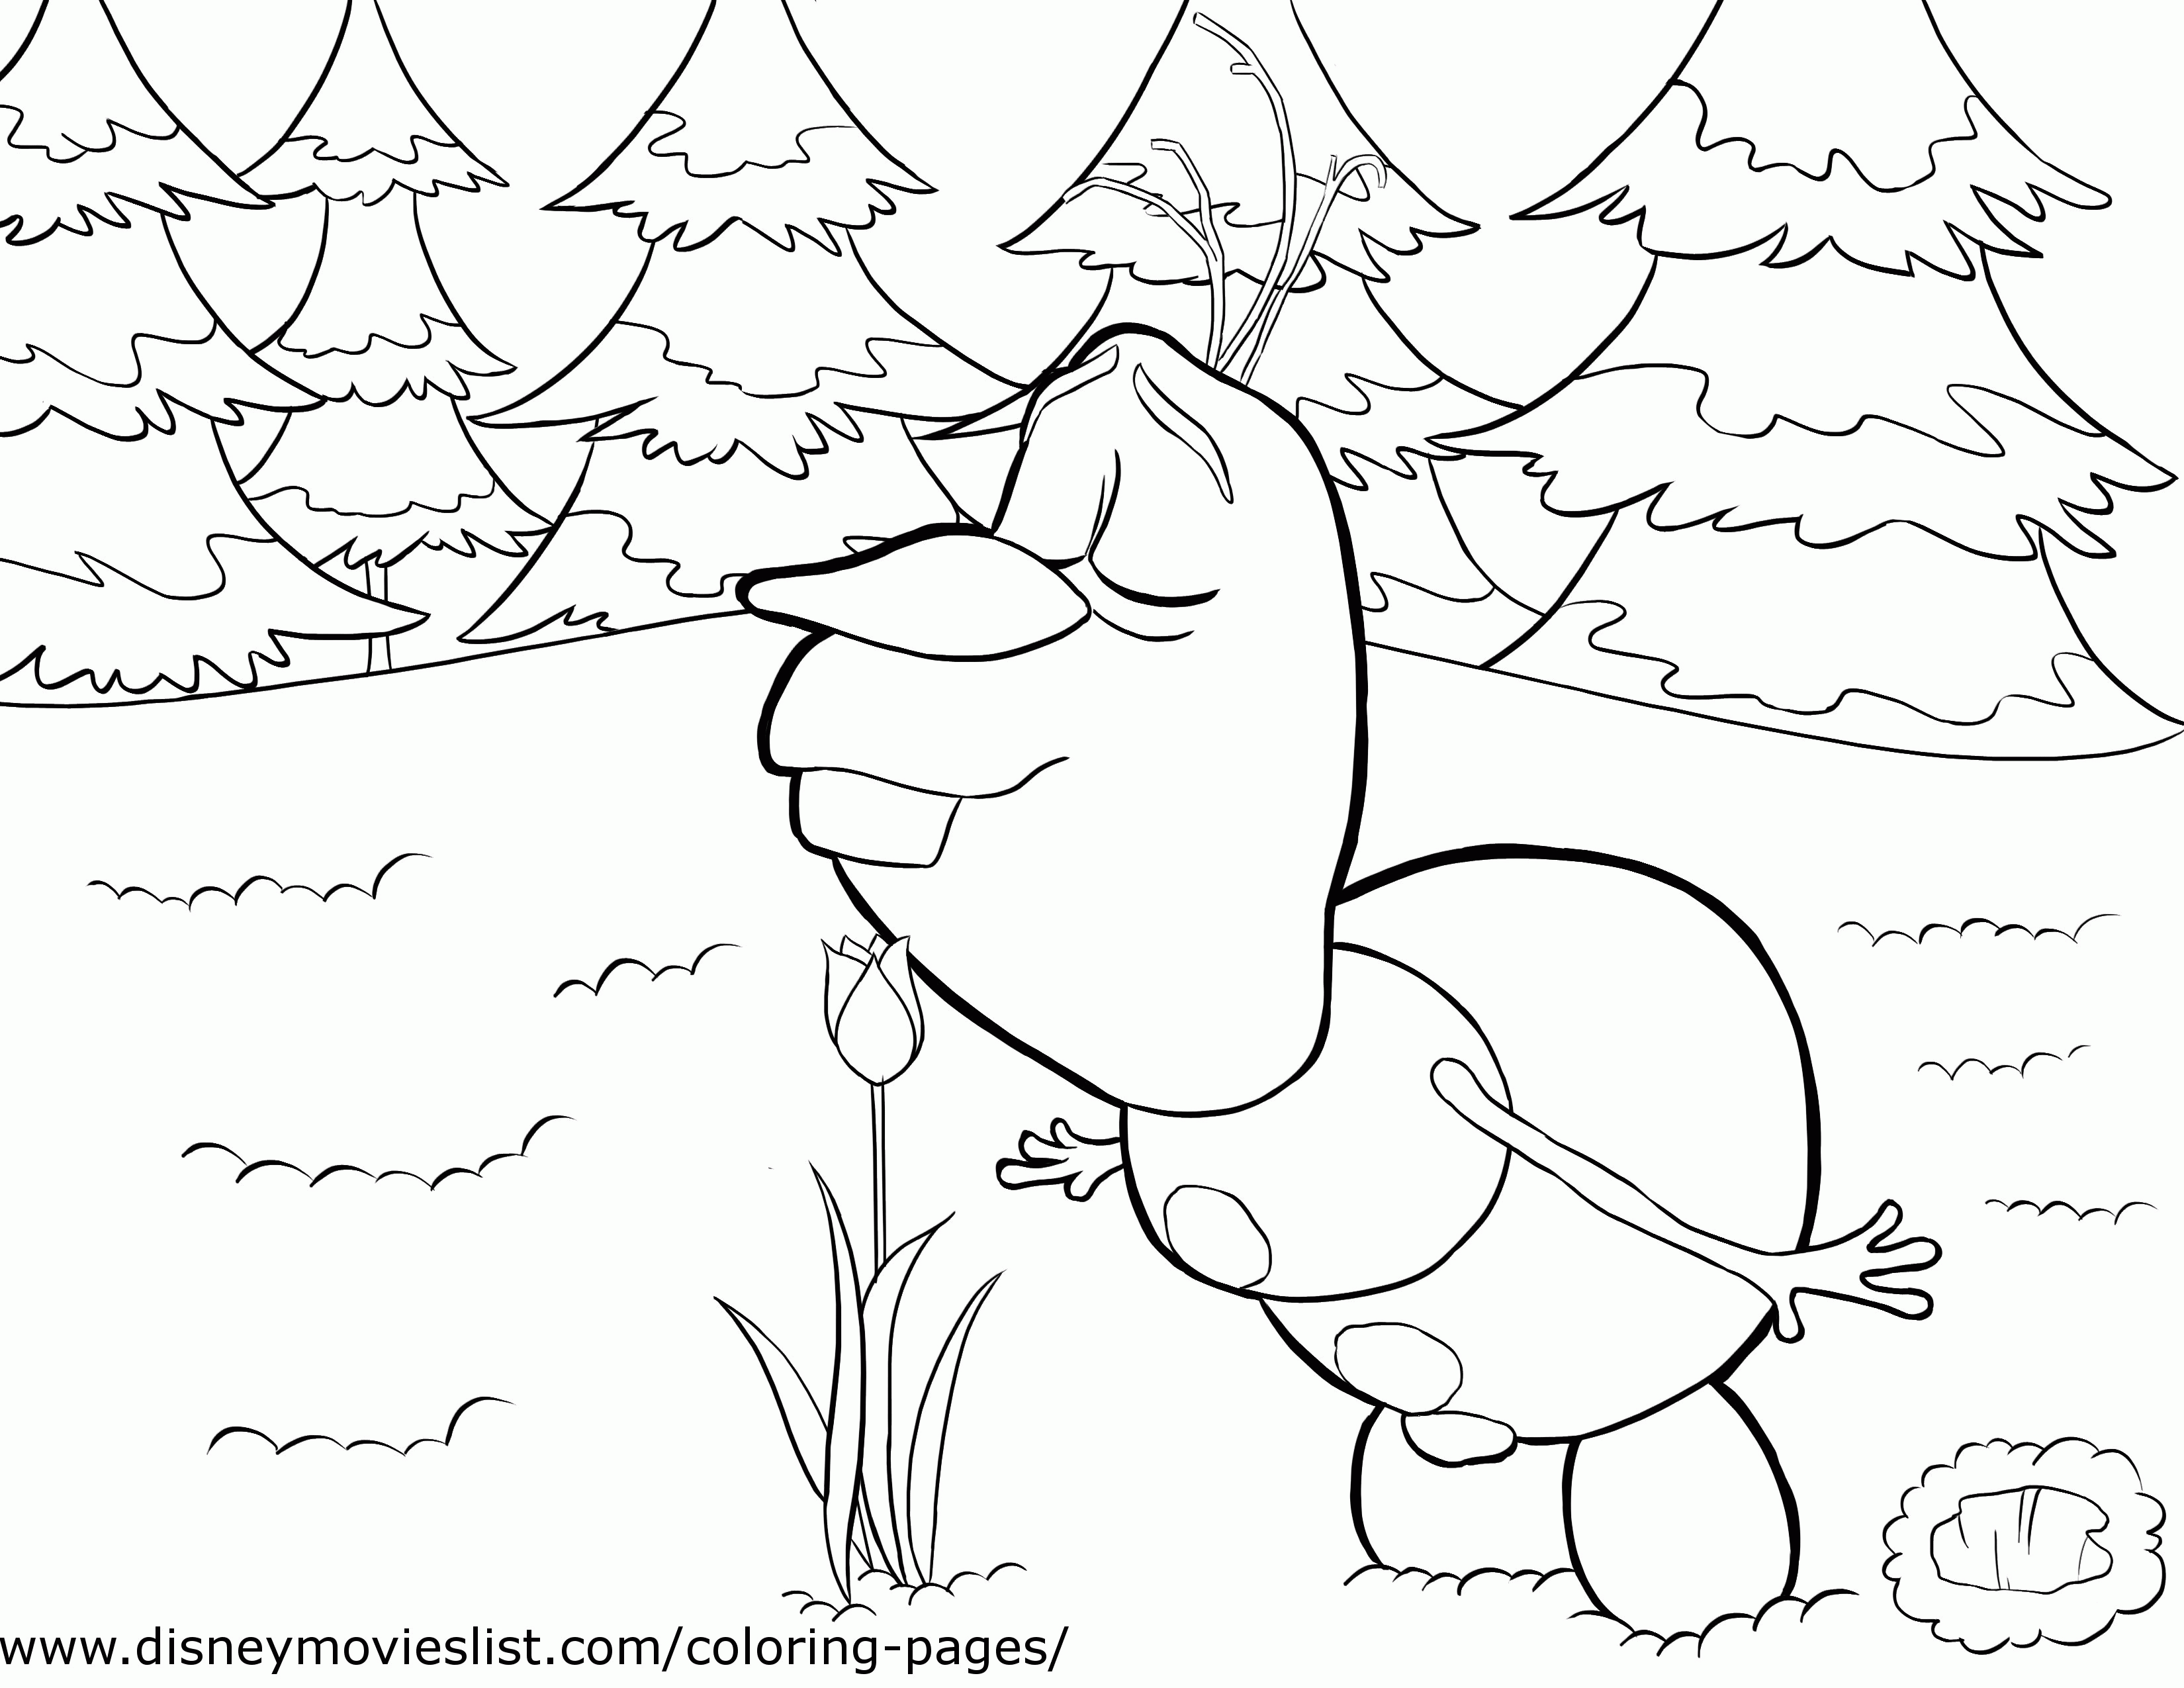 Free Frozen Coloring Pages, Download Free Frozen Coloring Pages ...